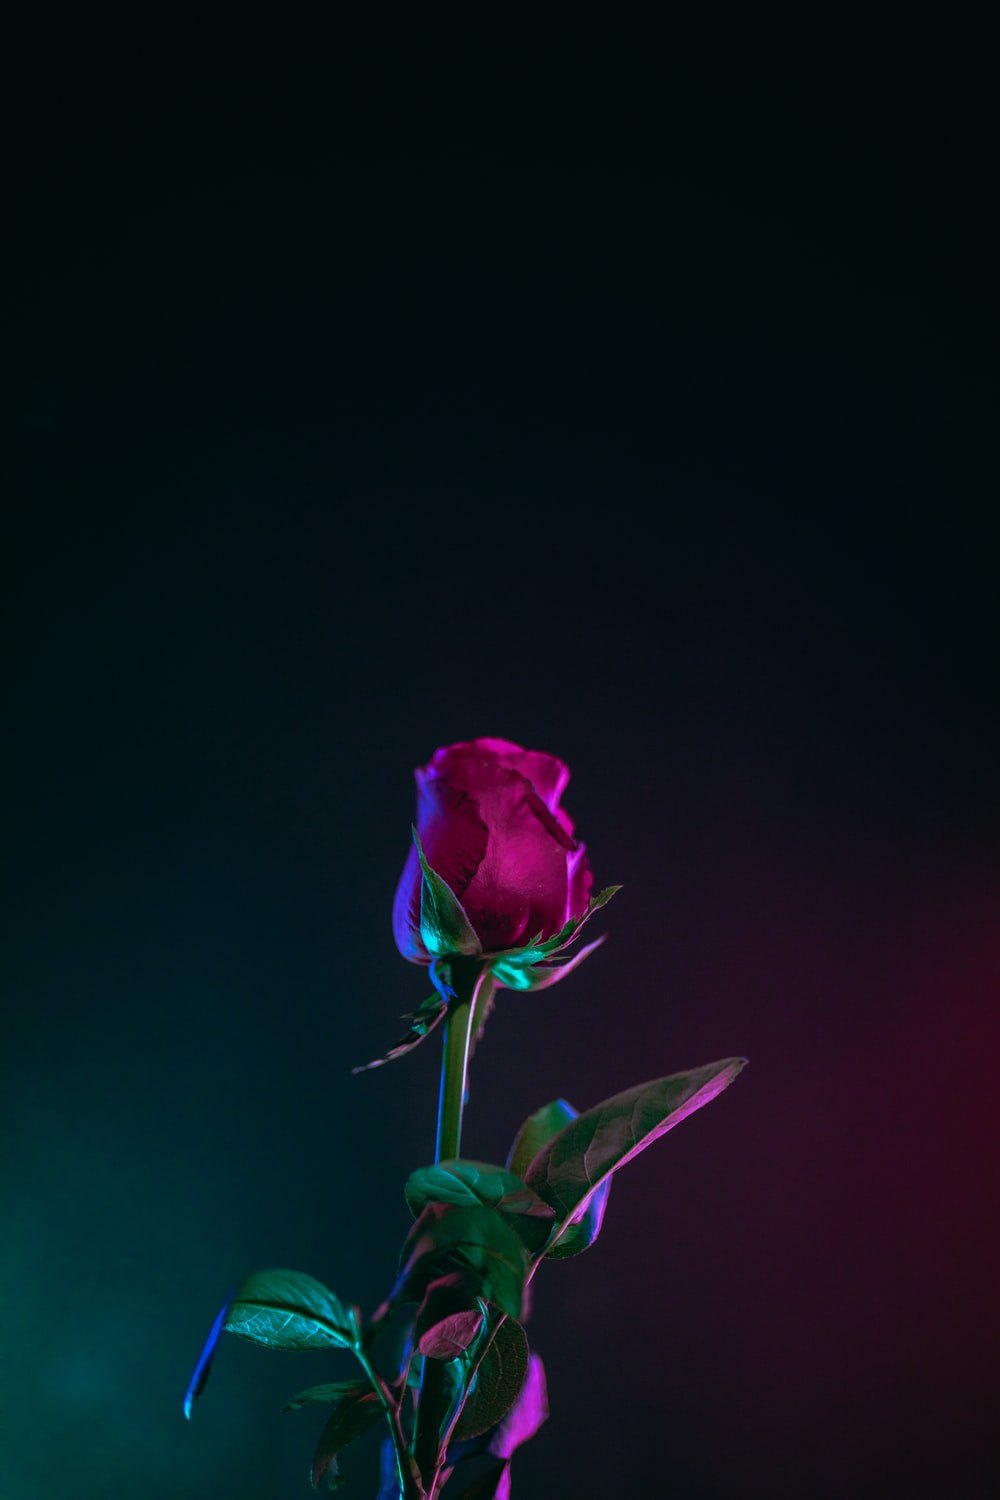 Romantic Rose Picture [HQ]. Download Free Image